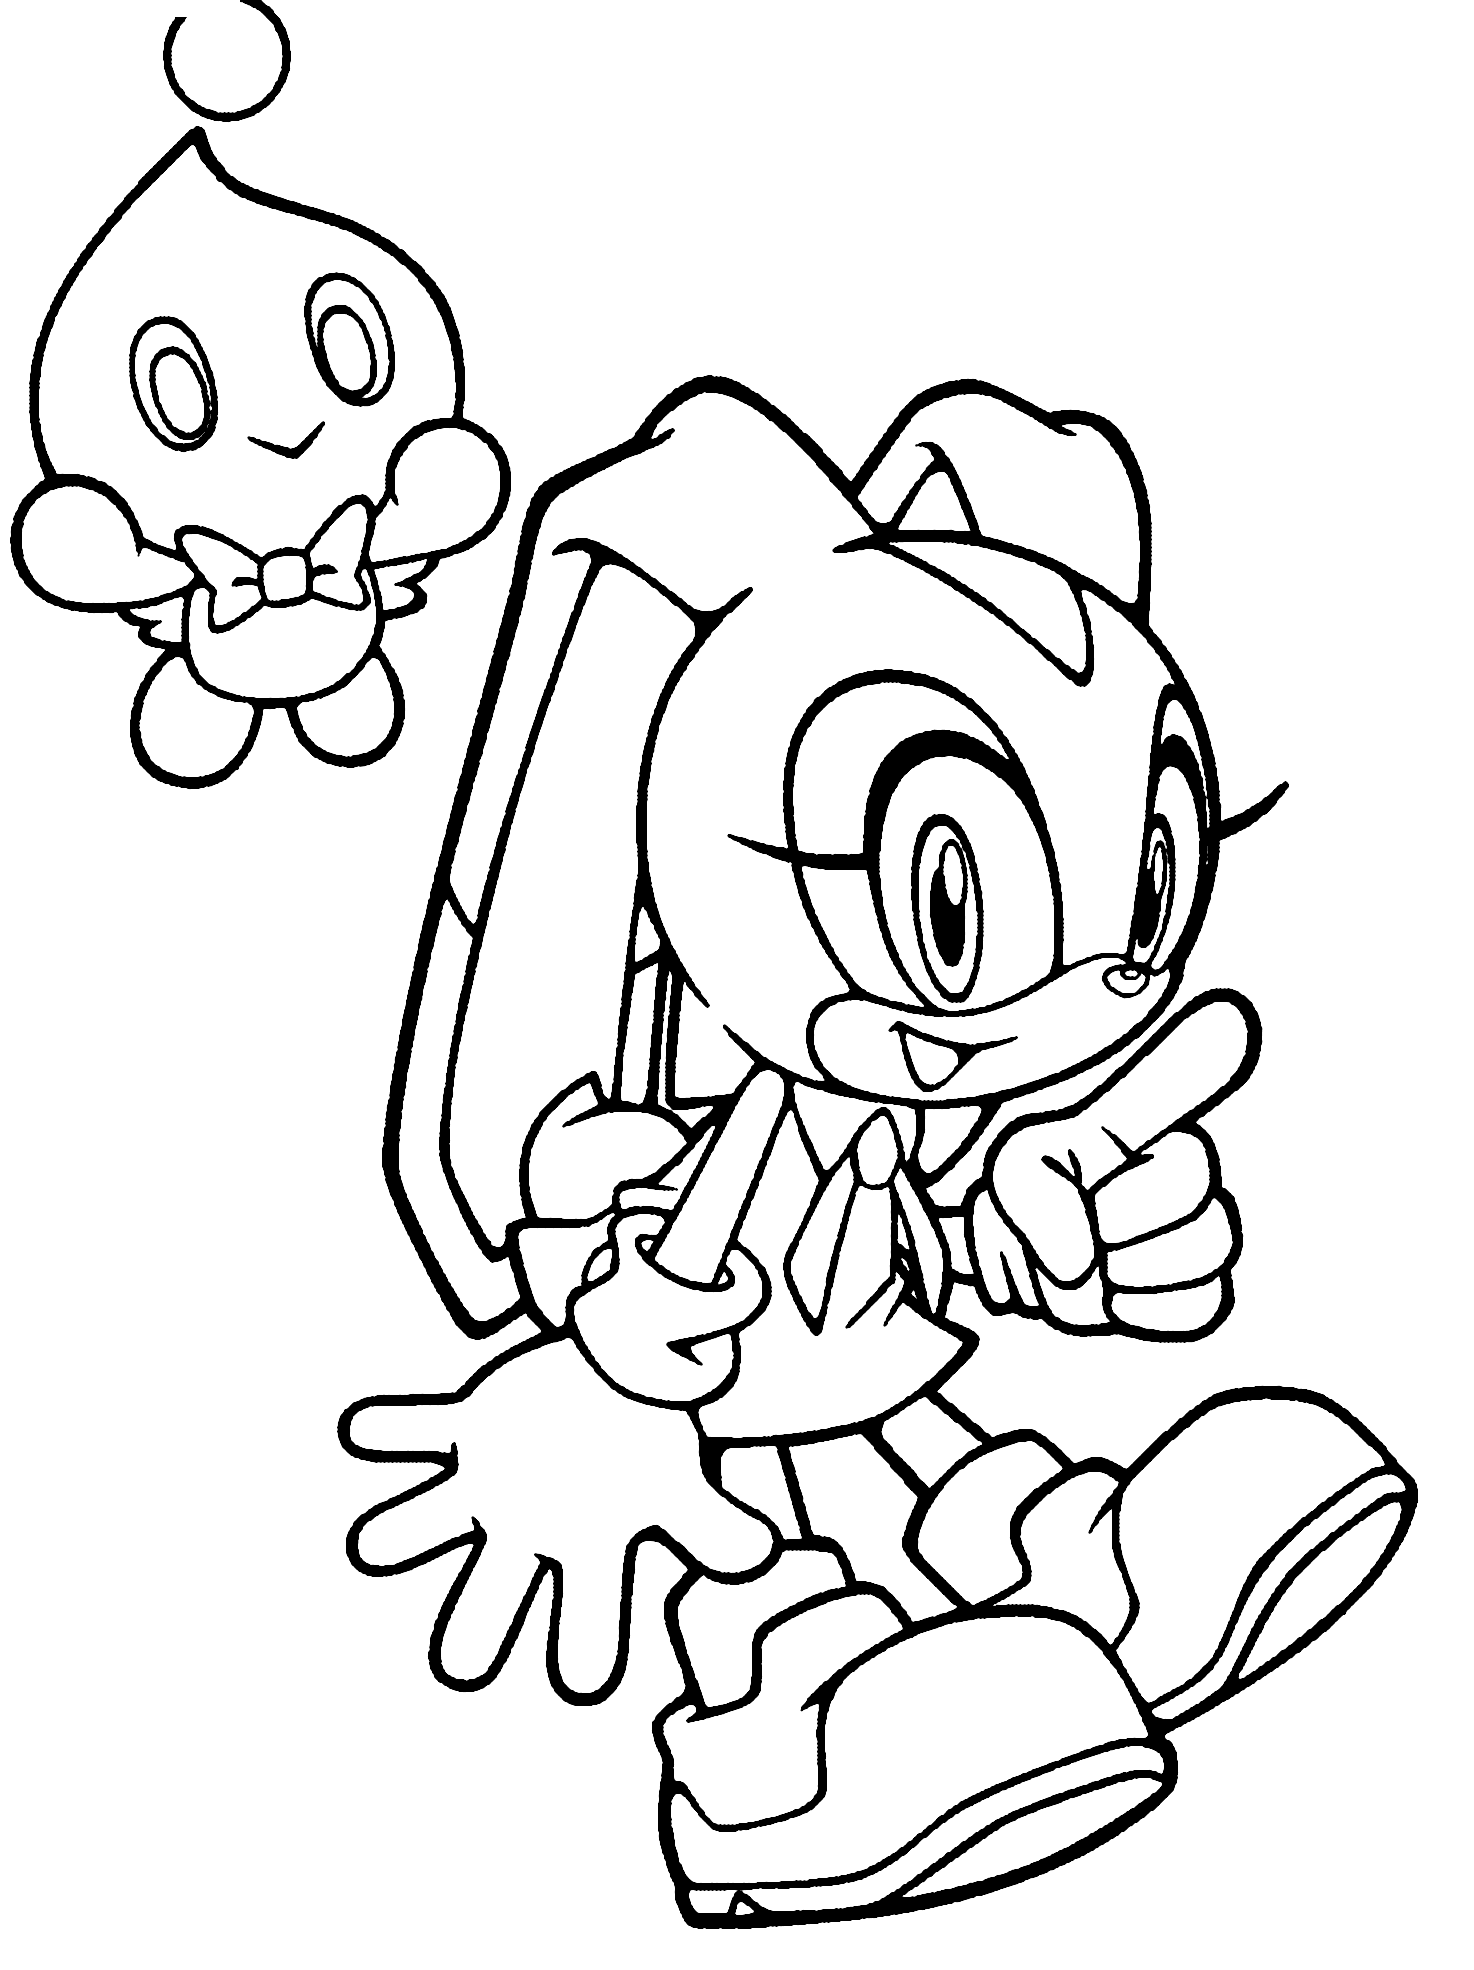 Coloring page - Cream the Rabbit